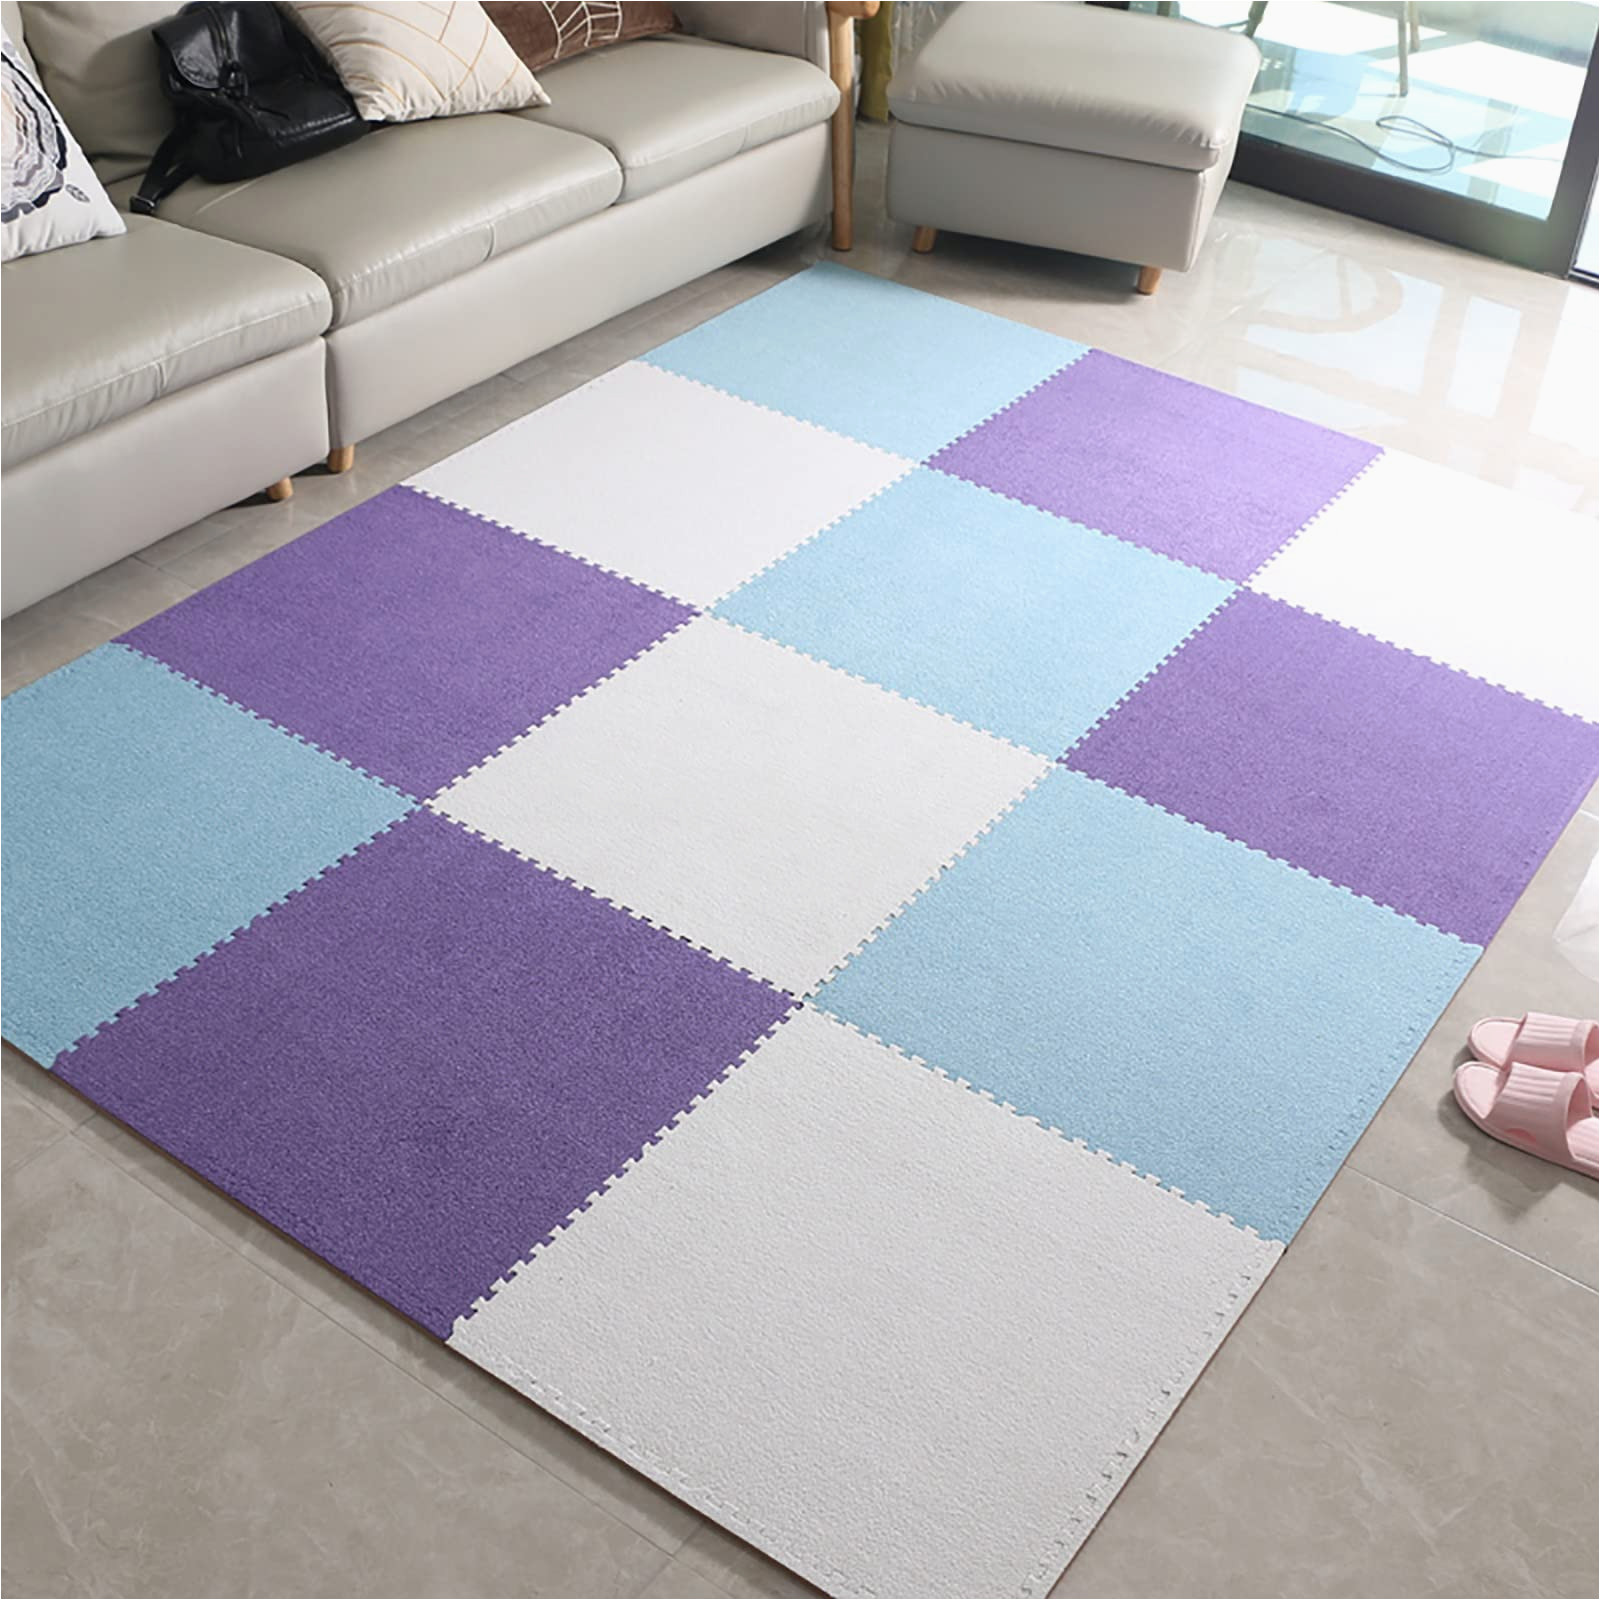 Can You Use Carpet Tiles as An area Rug 24×24 Inch Sqaure Interlocking Carpet Tiles, Short Plush Puzzle Floor Mat for Kids Room/bedroom/living Room, 12pcs area Rugs Exercise Play Mat (color …